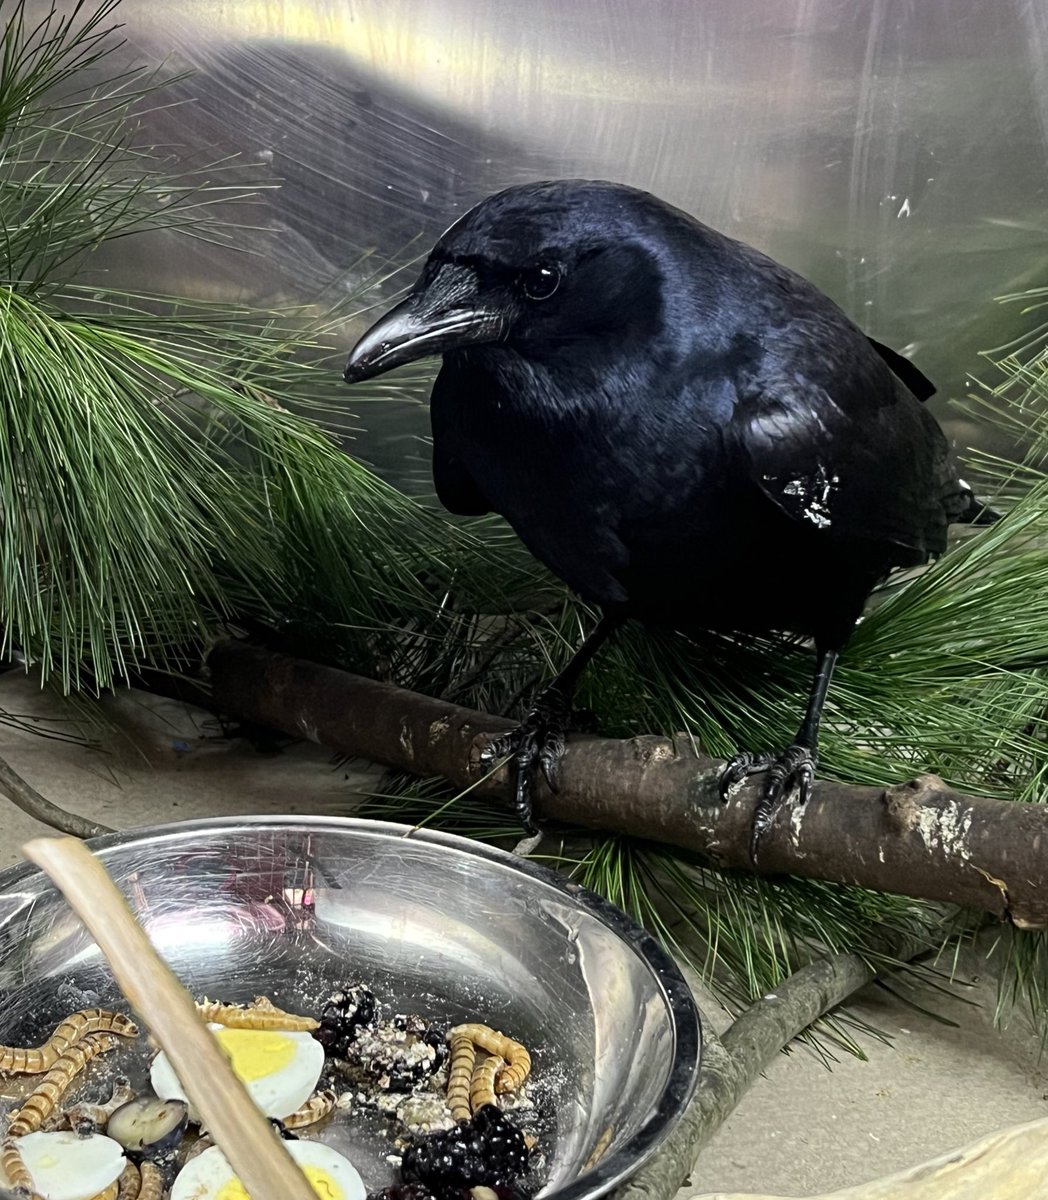 A swollen wrist grounded this American crow, but fortunately he was rescued in Chelsea and brought in for care. We’ll be giving him X-rays tomorrow. In the meantime he’s receiving fluids, painkiller and a special Sunday Supper, corvid-style. 📷: Rachel Frank